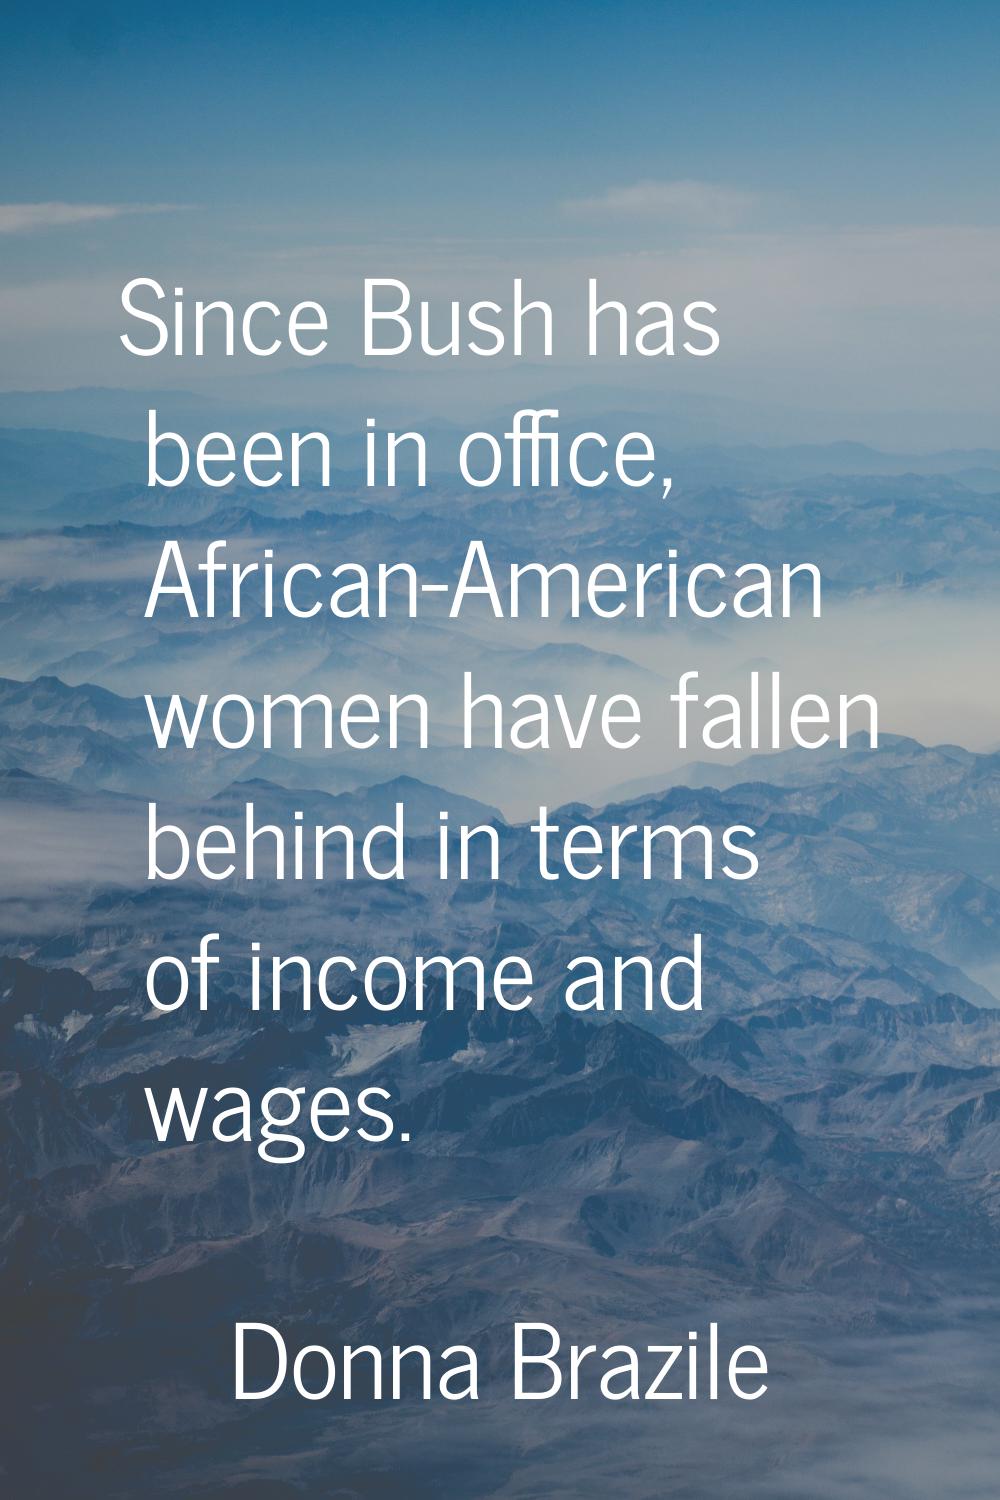 Since Bush has been in office, African-American women have fallen behind in terms of income and wag